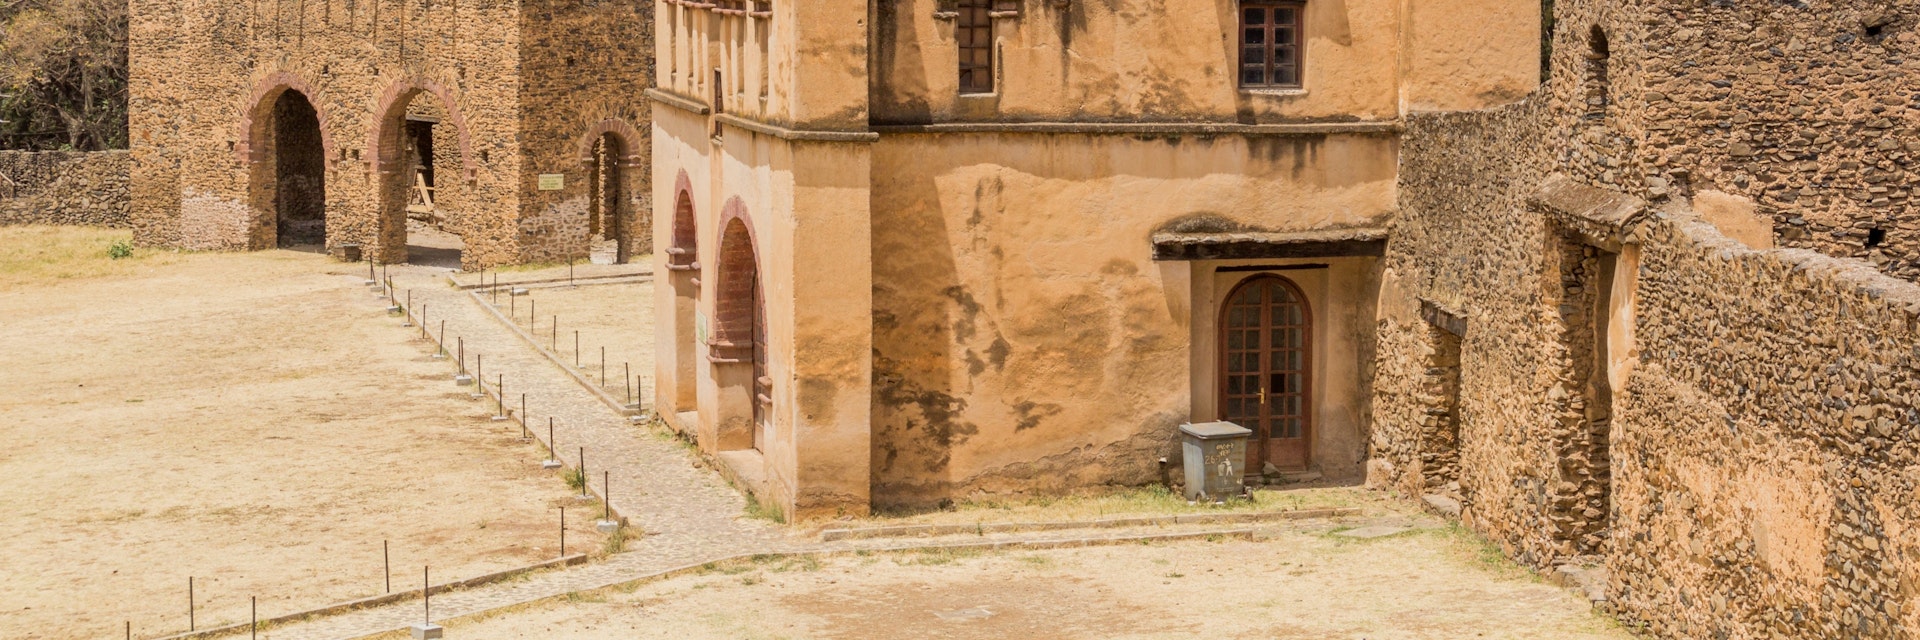 Royal archive and library buildings in the Royal Enclosure in Gondar, Ethiopia
